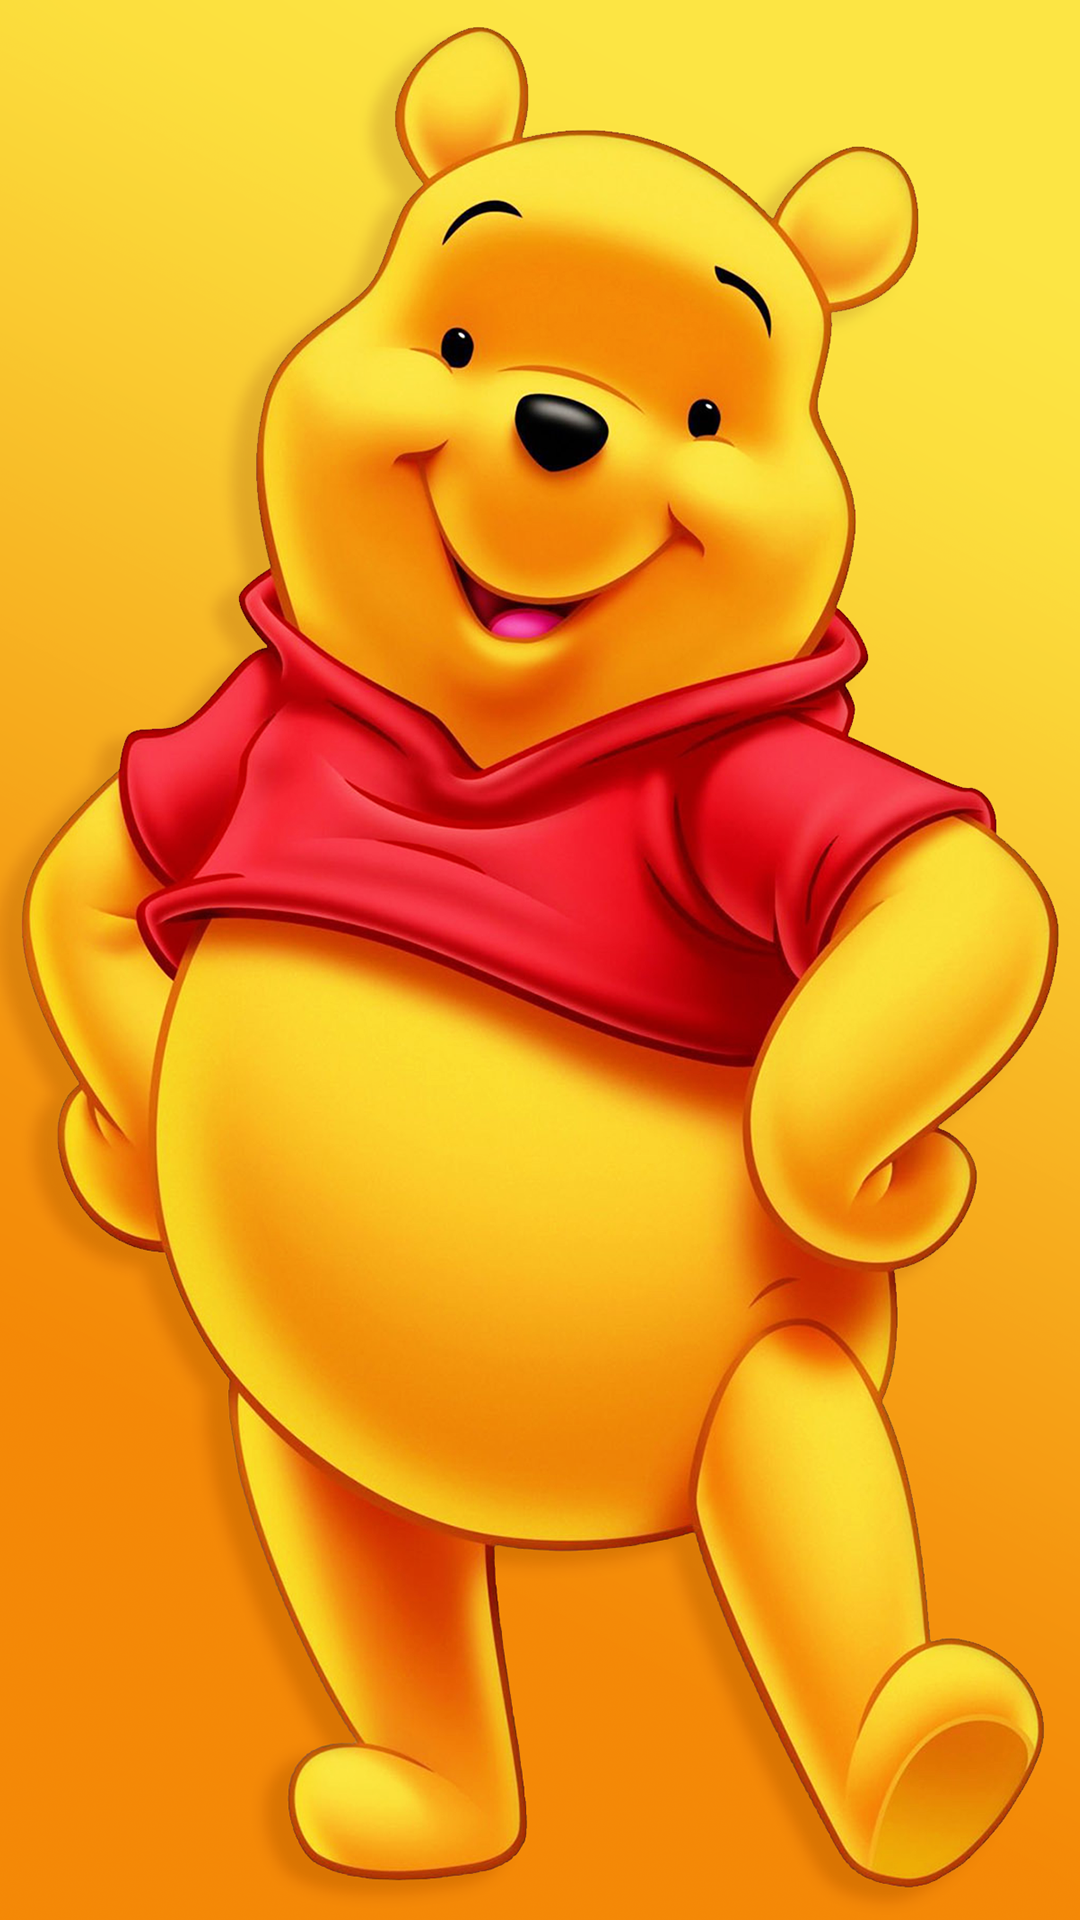 Winnie The Pooh Wallpaper for Phone